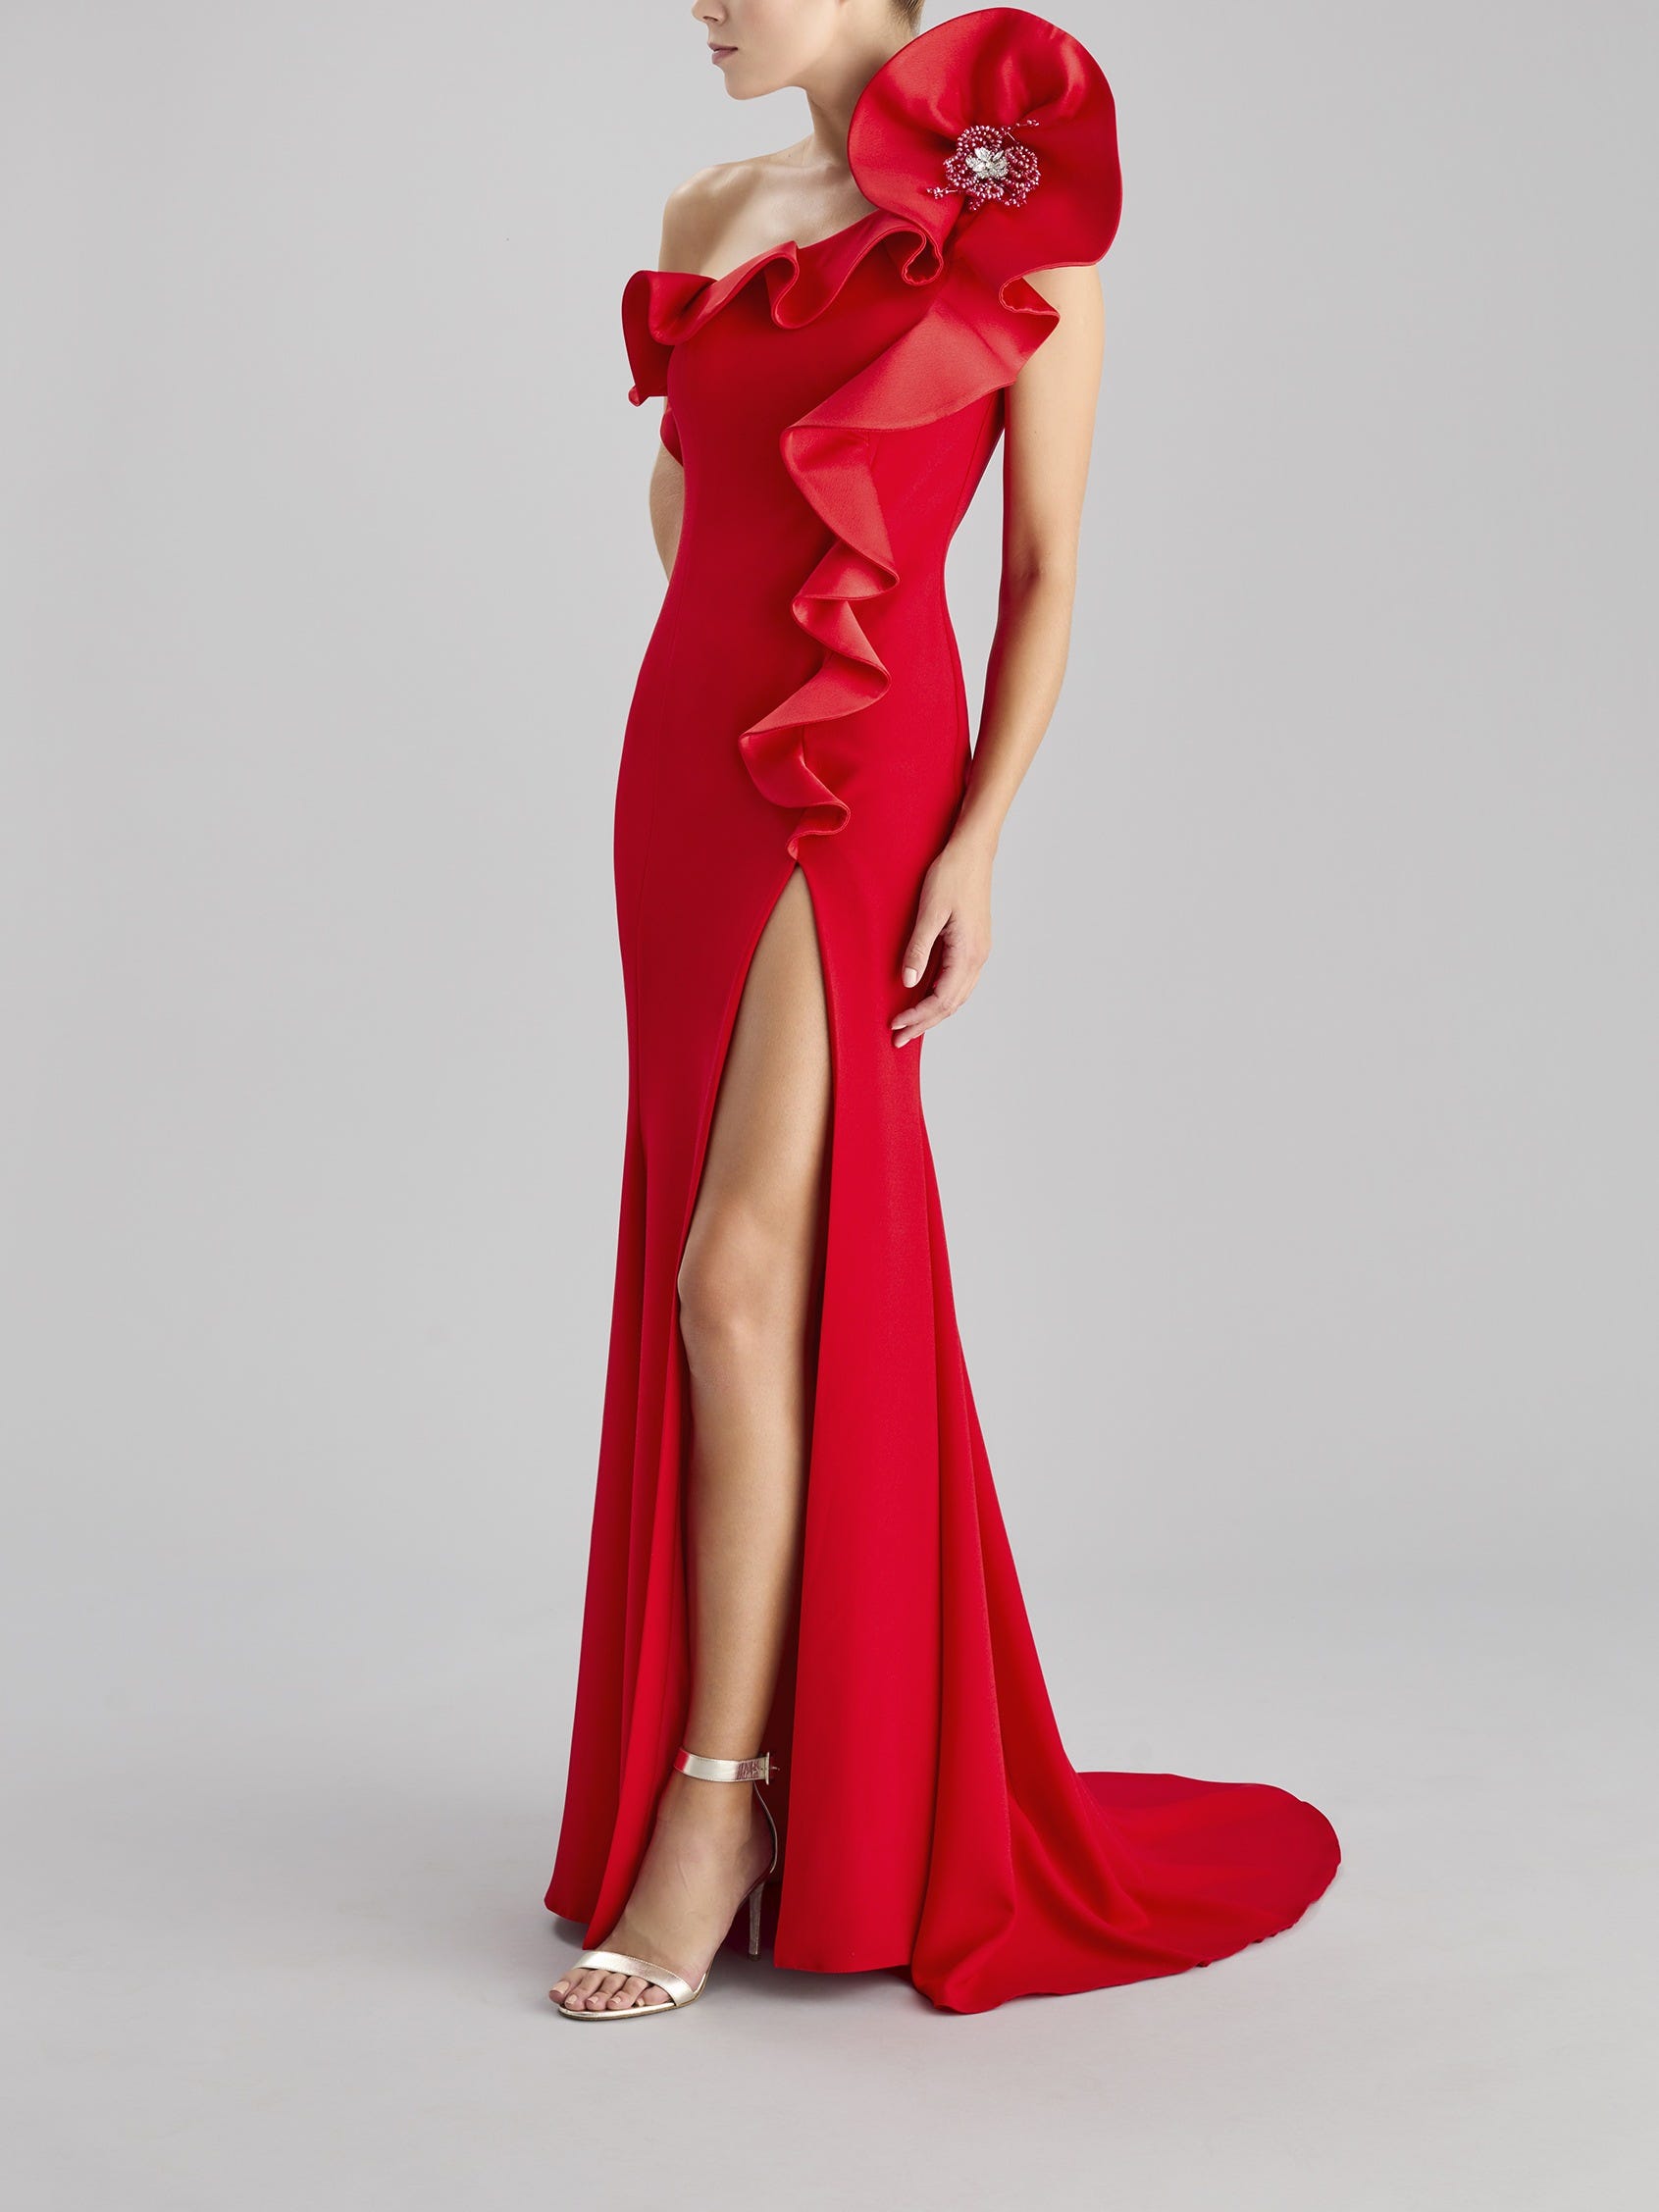 Red Cocktail Dresses - Cocktail Collection | ROSA CLARÁ